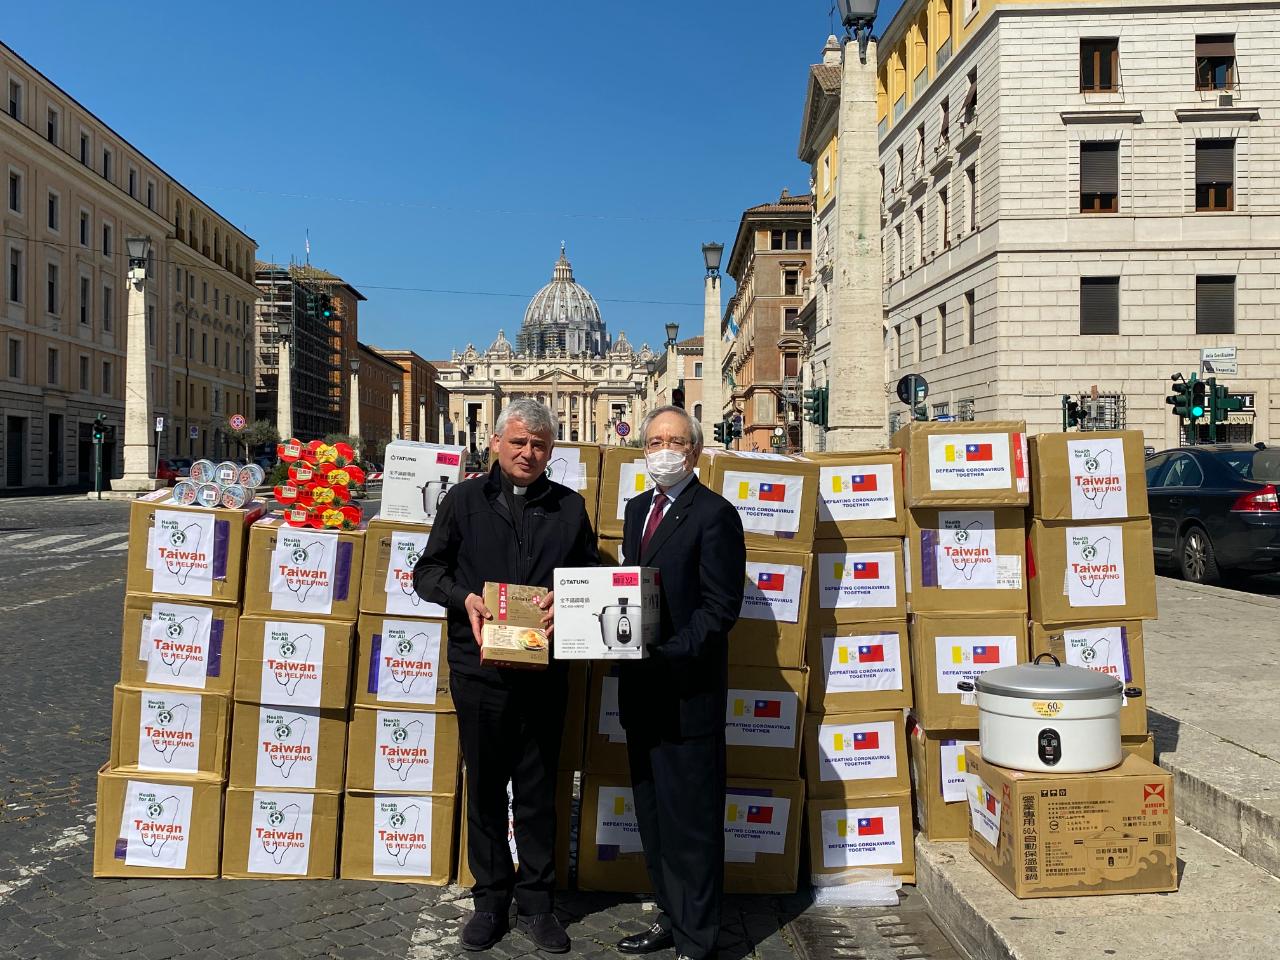 Taiwan on April 27,2020, donated three rice cookers and canned food products to the Holy See in response to Pope Francis' call to help those in Vatican City affected by the COVID-19 pandemic.